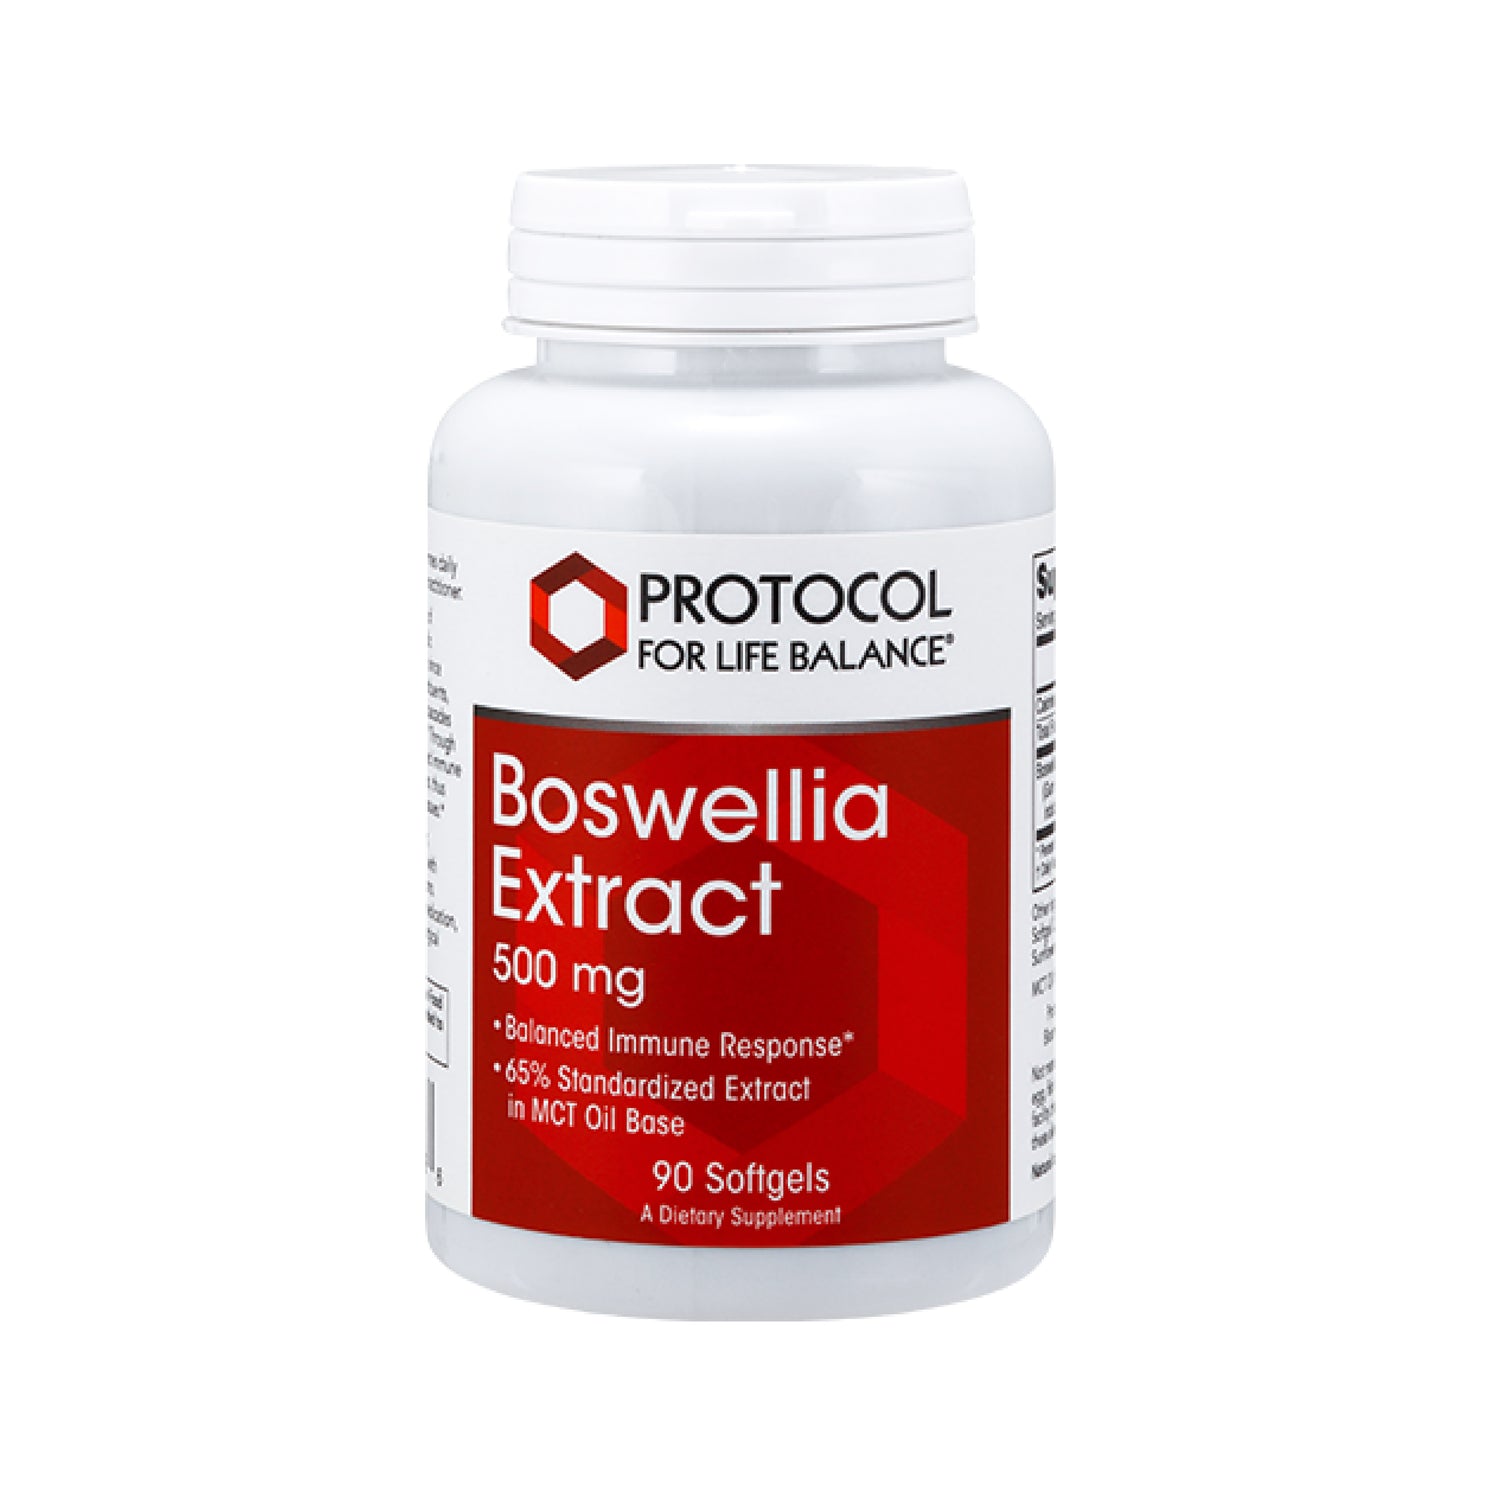 Protocol for Life Balance, Boswellia Extract, 500 mg, 90 Softgels - Bloom Concept